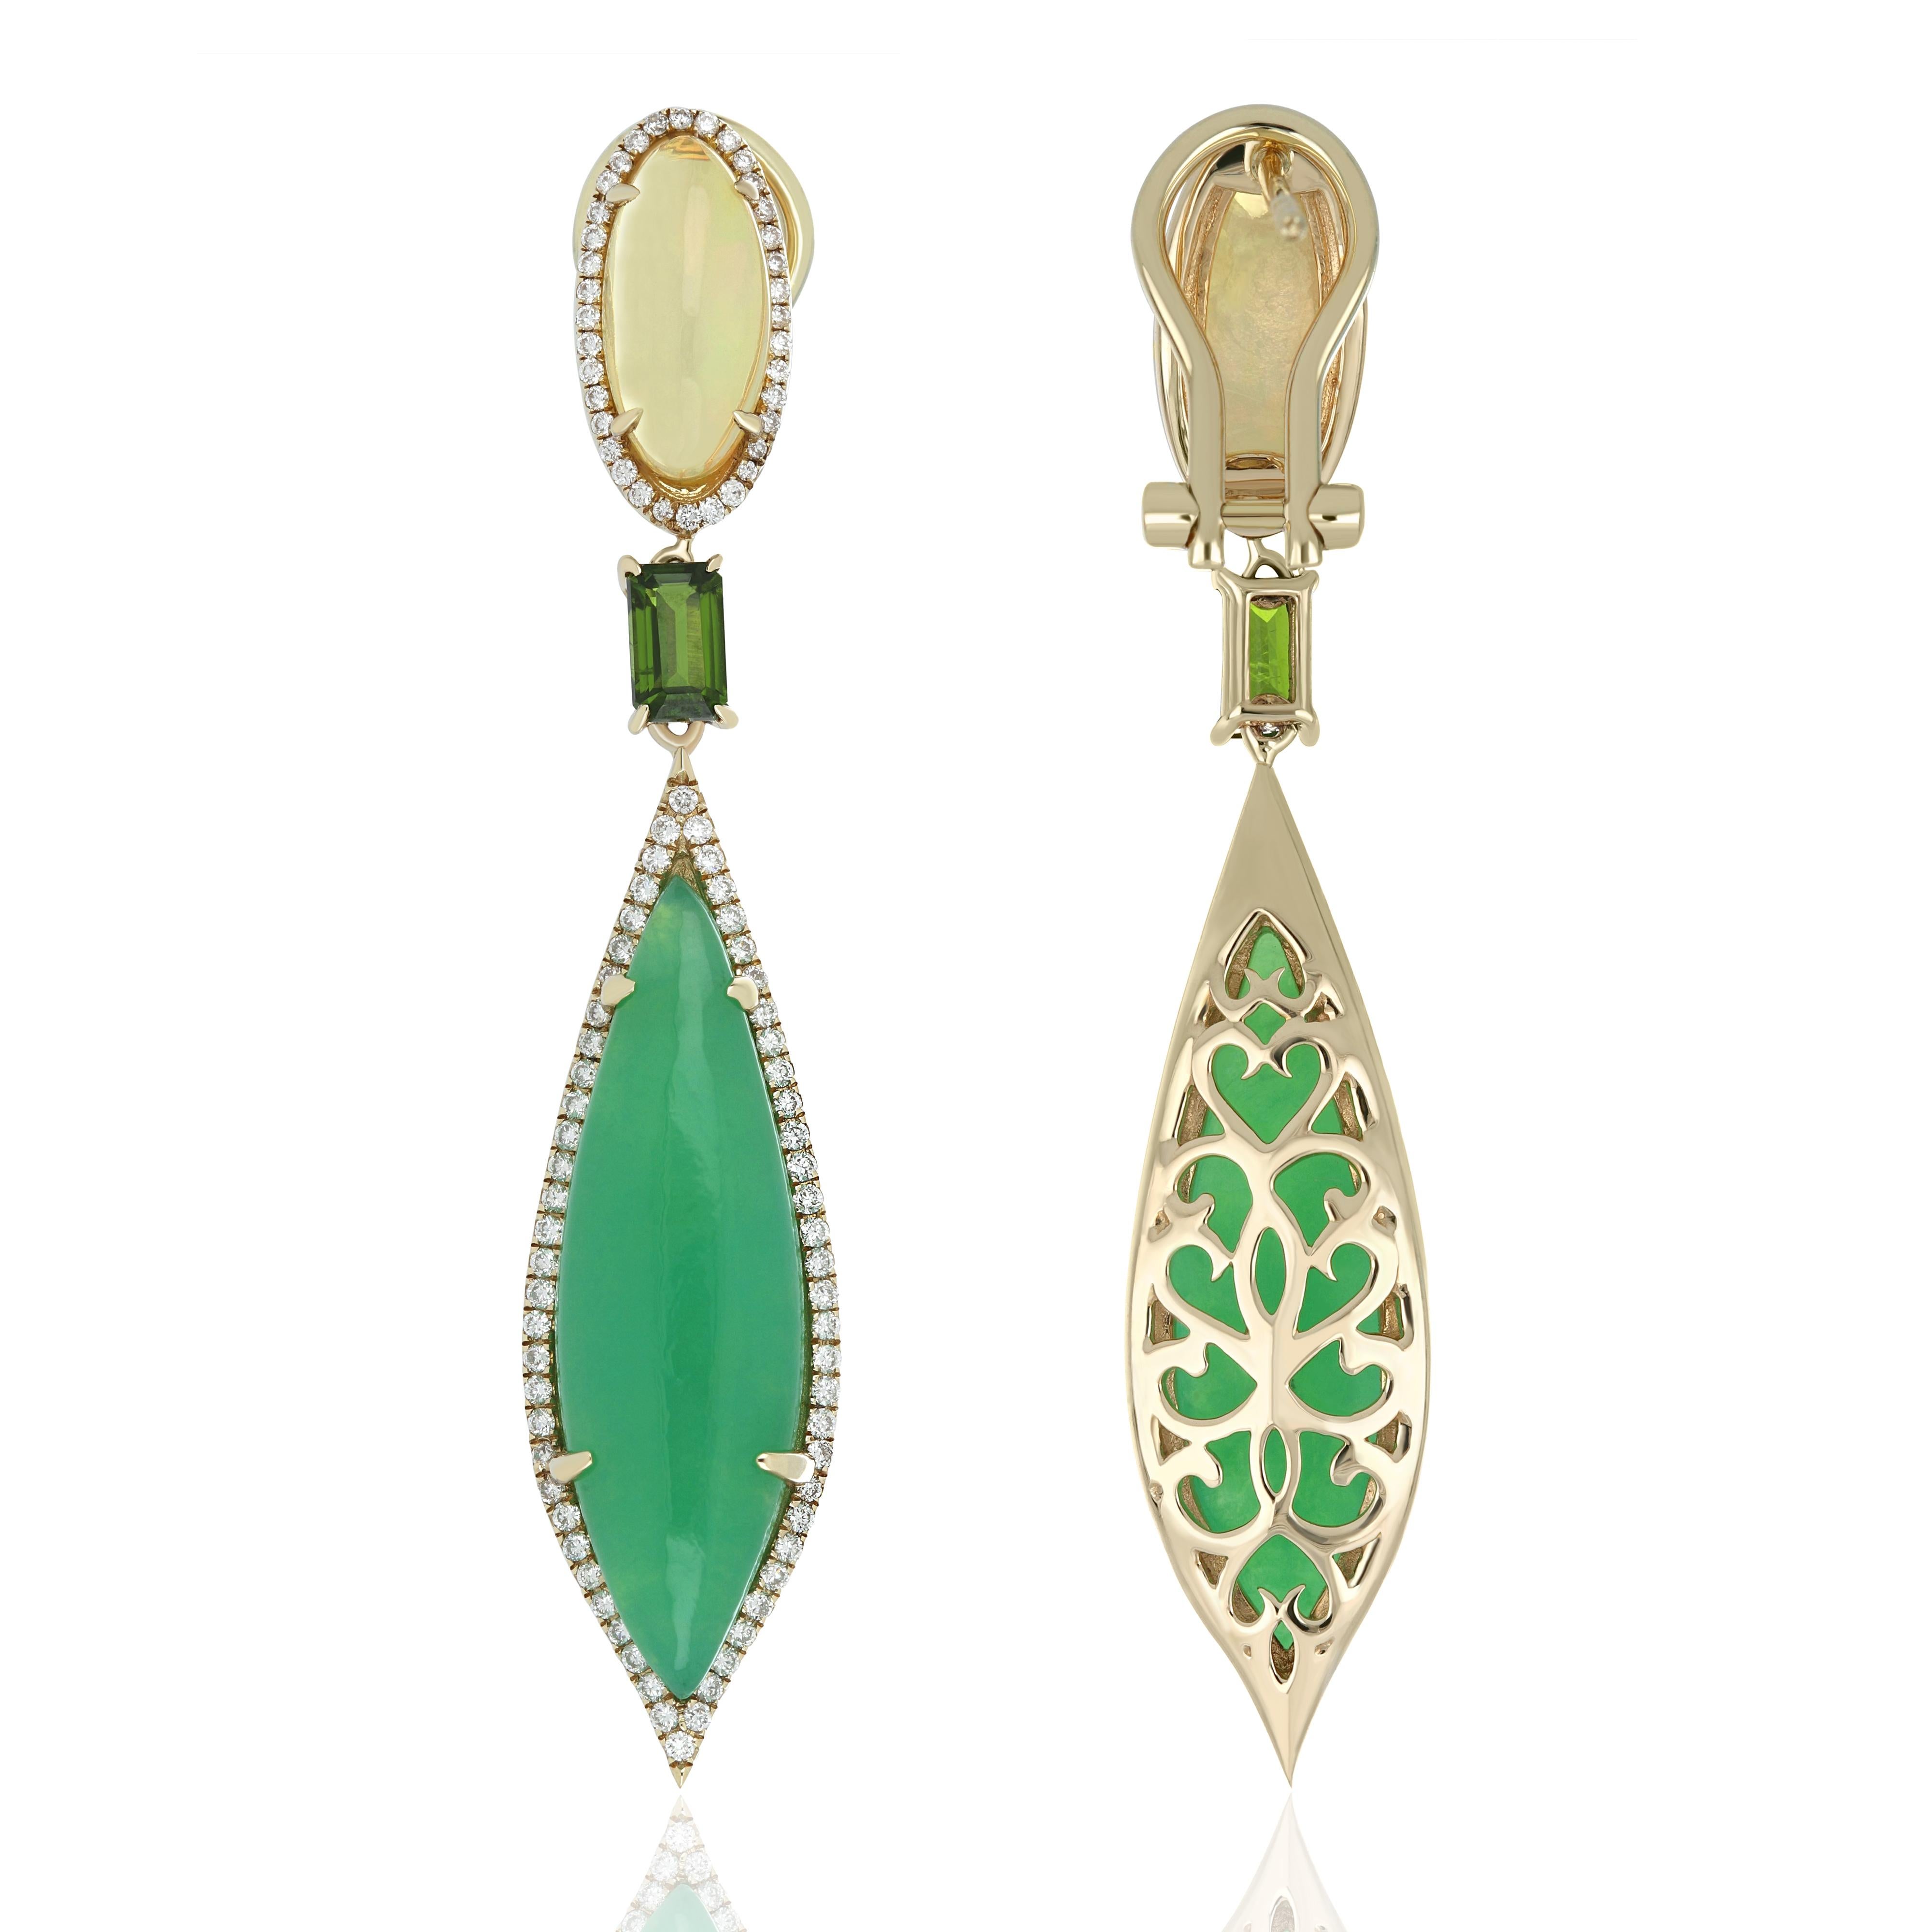 Beautiful and Elegant pair of Multi Stone Dangle Earring set with 13.20 Cts of  Marquise Cabochon Chrysoprase, enhanced with Octagon  Cut 0.73 Cts Chrome Diopside & vibrant Ethiopian Opal.  Accented with micro pave set 0.62 Cts of Diamond in 14 Kata